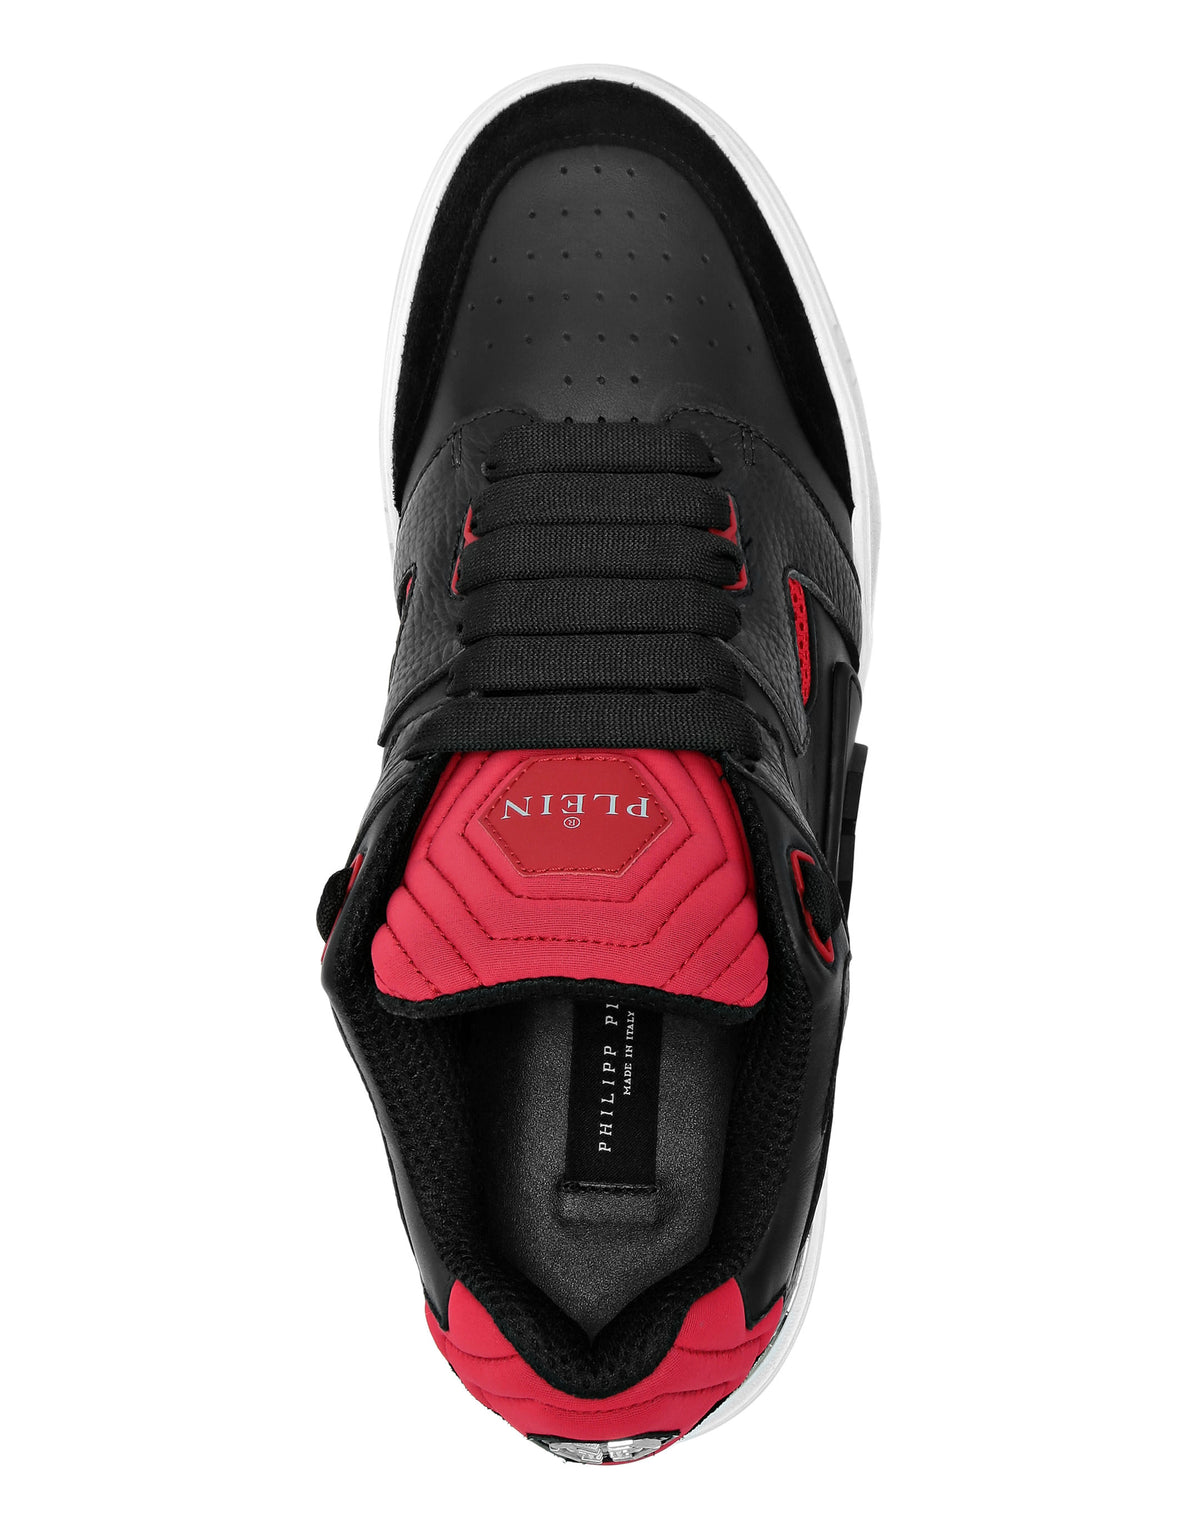 Mix Leather Lo-Top Sneakers black / red